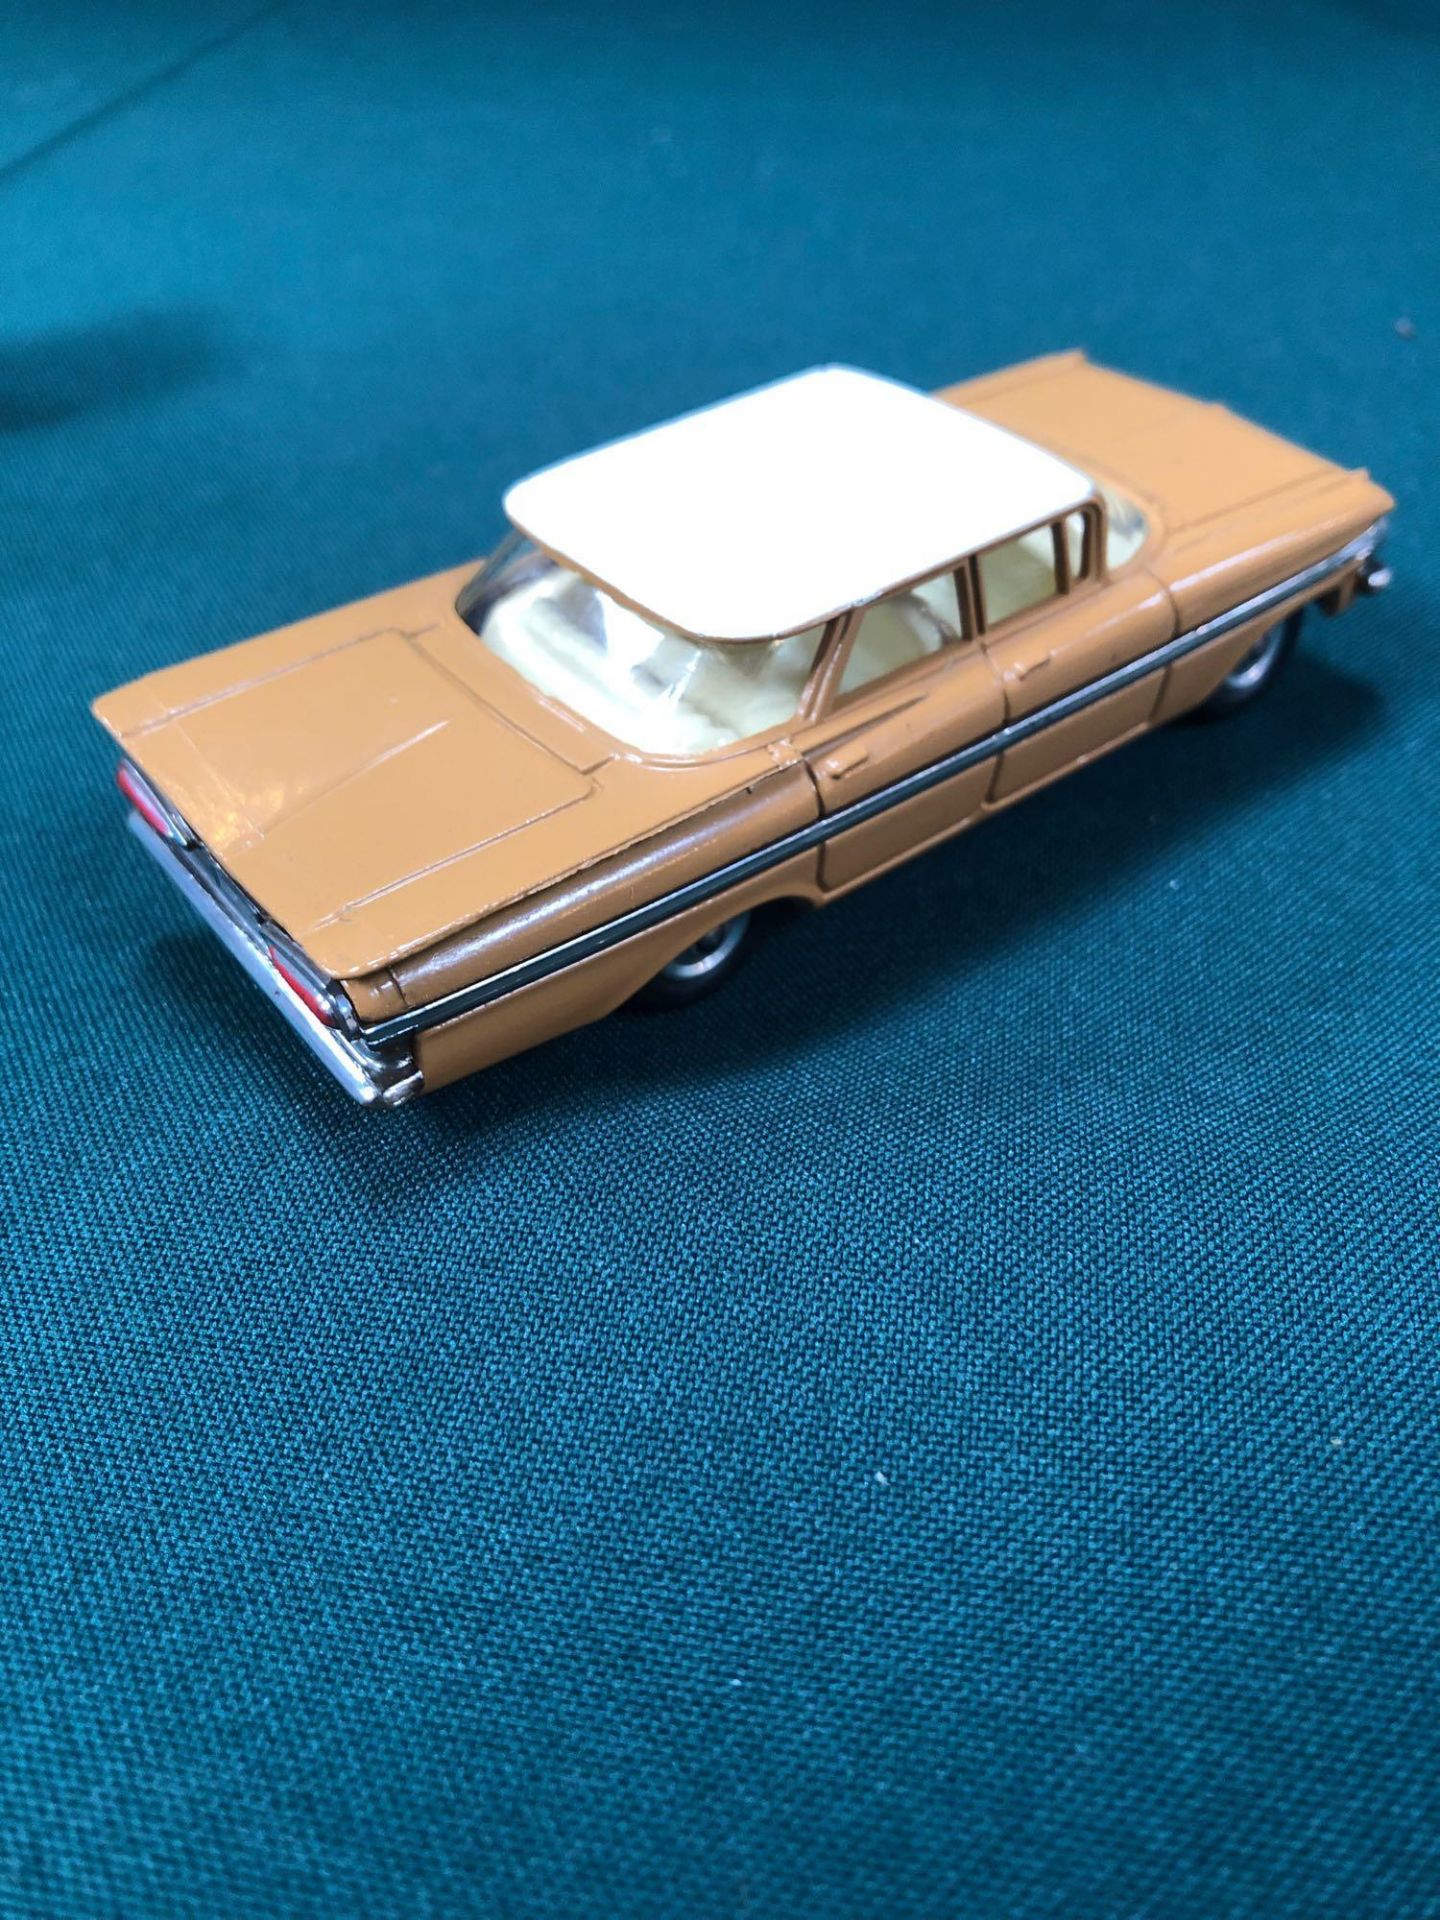 Mint Corgi Toys Diecast #248 Chevrolet Impala In Light Brown With Leaflet In A Excellent Box - Image 3 of 3